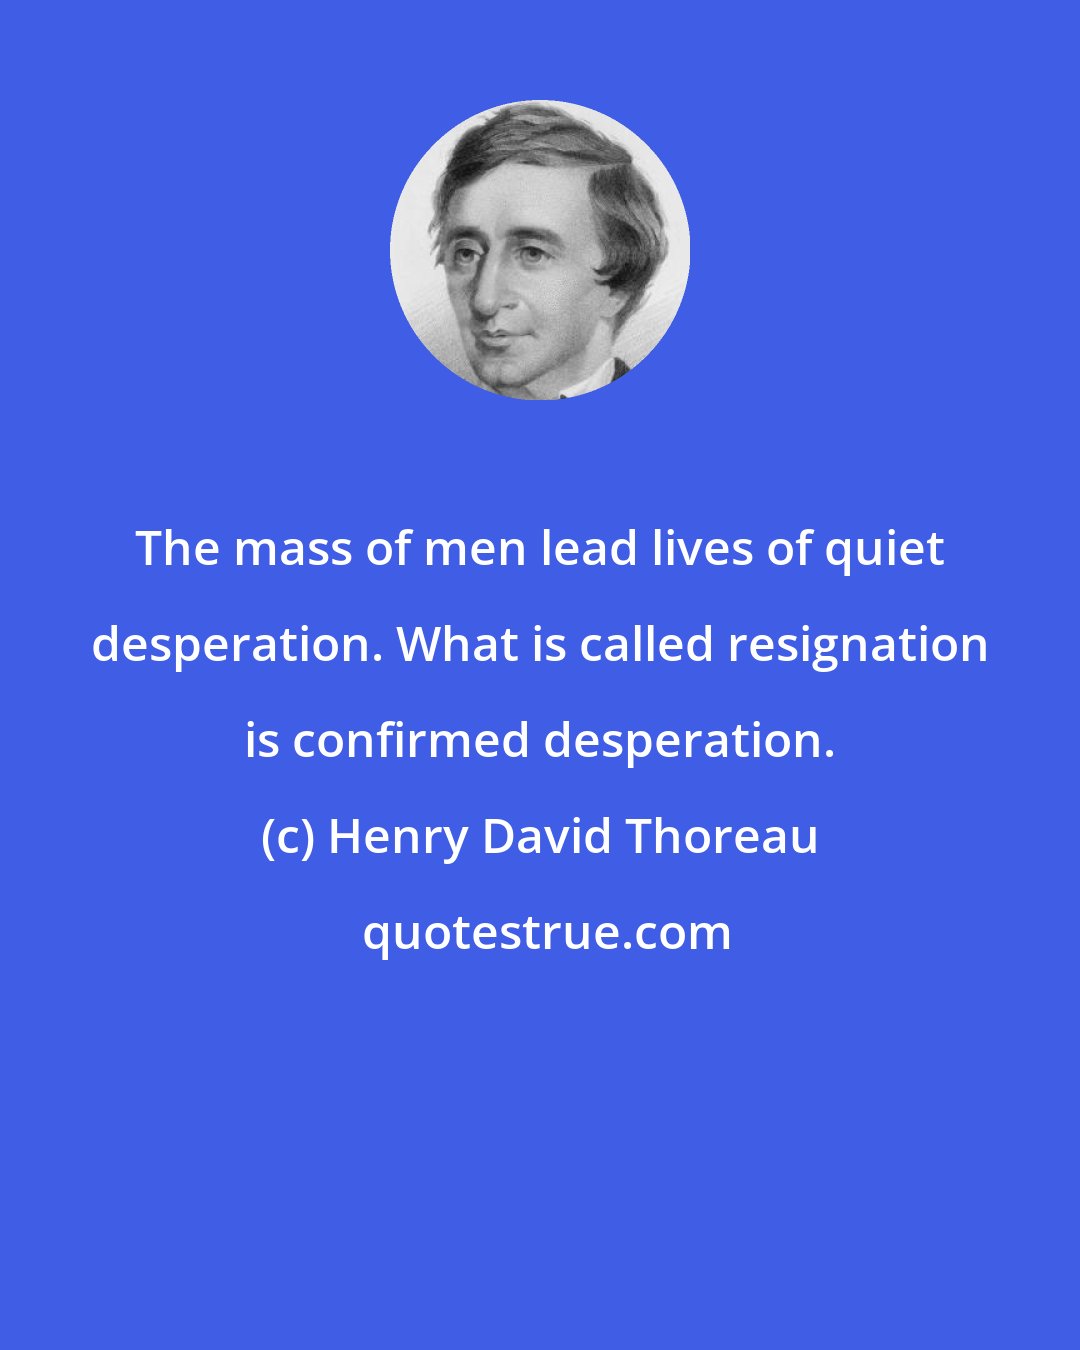 Henry David Thoreau: The mass of men lead lives of quiet desperation. What is called resignation is confirmed desperation.